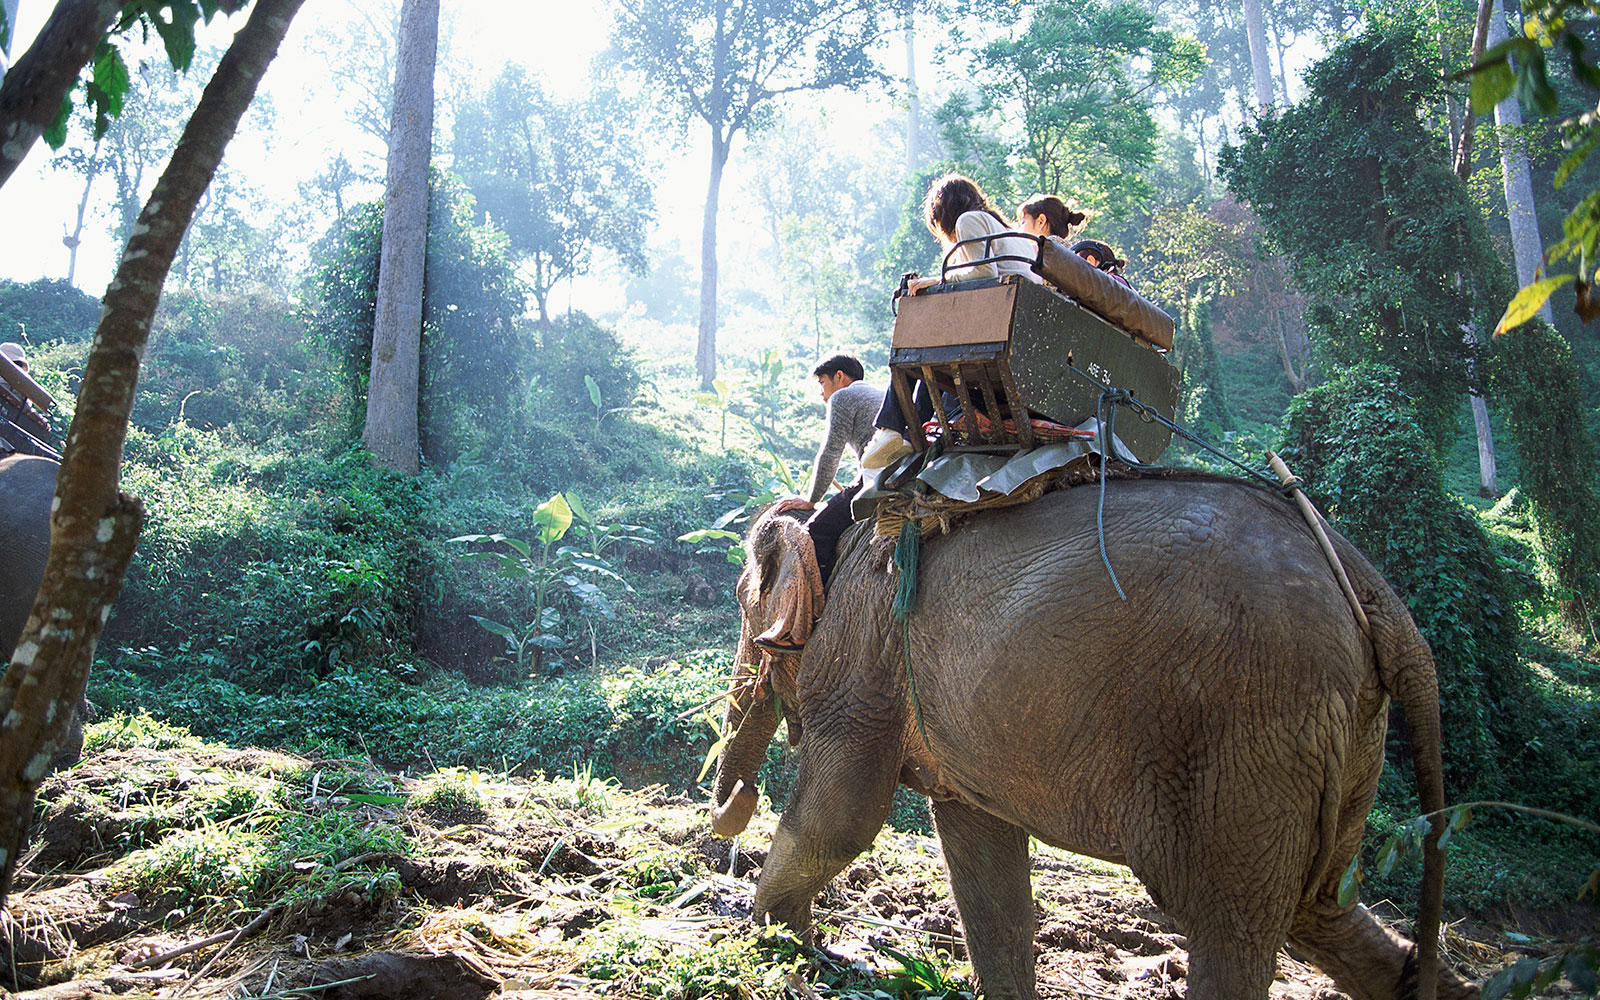 Four people Sitting on an Elephant, Chiang mai, Thailand